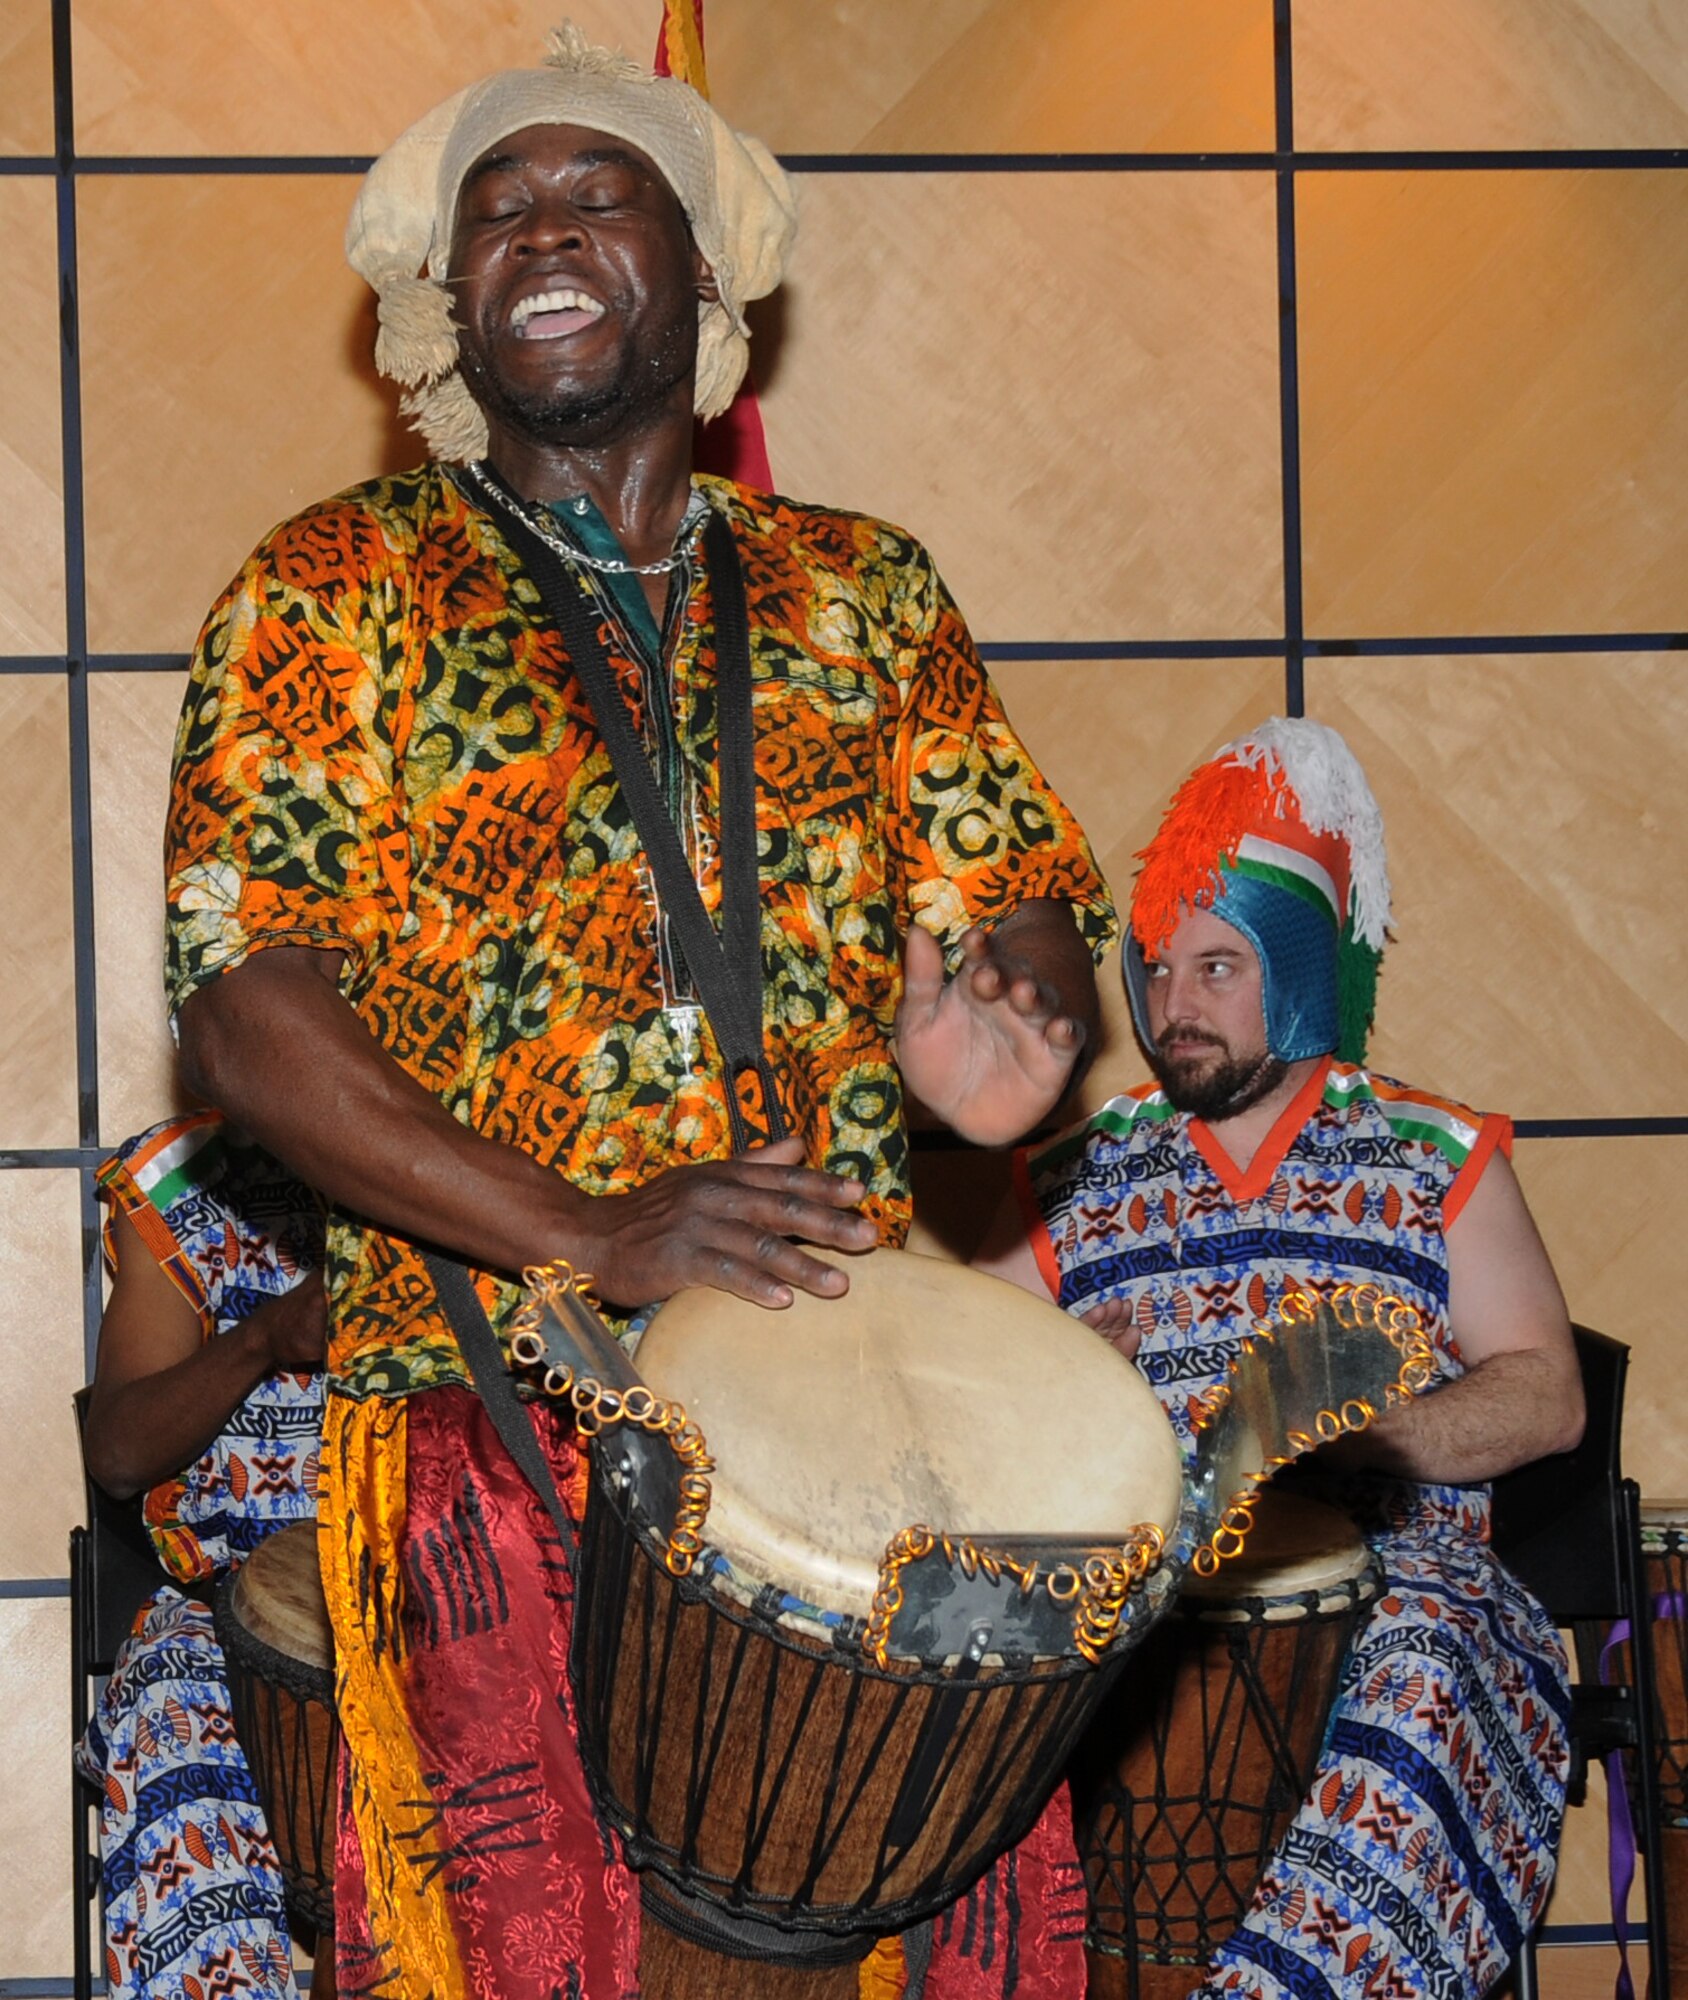 Members of Afrique Aya, a troupe of drummers and dancers, perform at the 188th Fighter Wing during a Black History Month celebration held at the Hugh B. Correll Headquarters building Feb. 3 during a Unit Training Assembly. The group performed rhythms inspired by the music and culture of West Africa. (National Guard photo by Airman 1st Class Cody Martin/188th Fighter Wing Public Affairs)